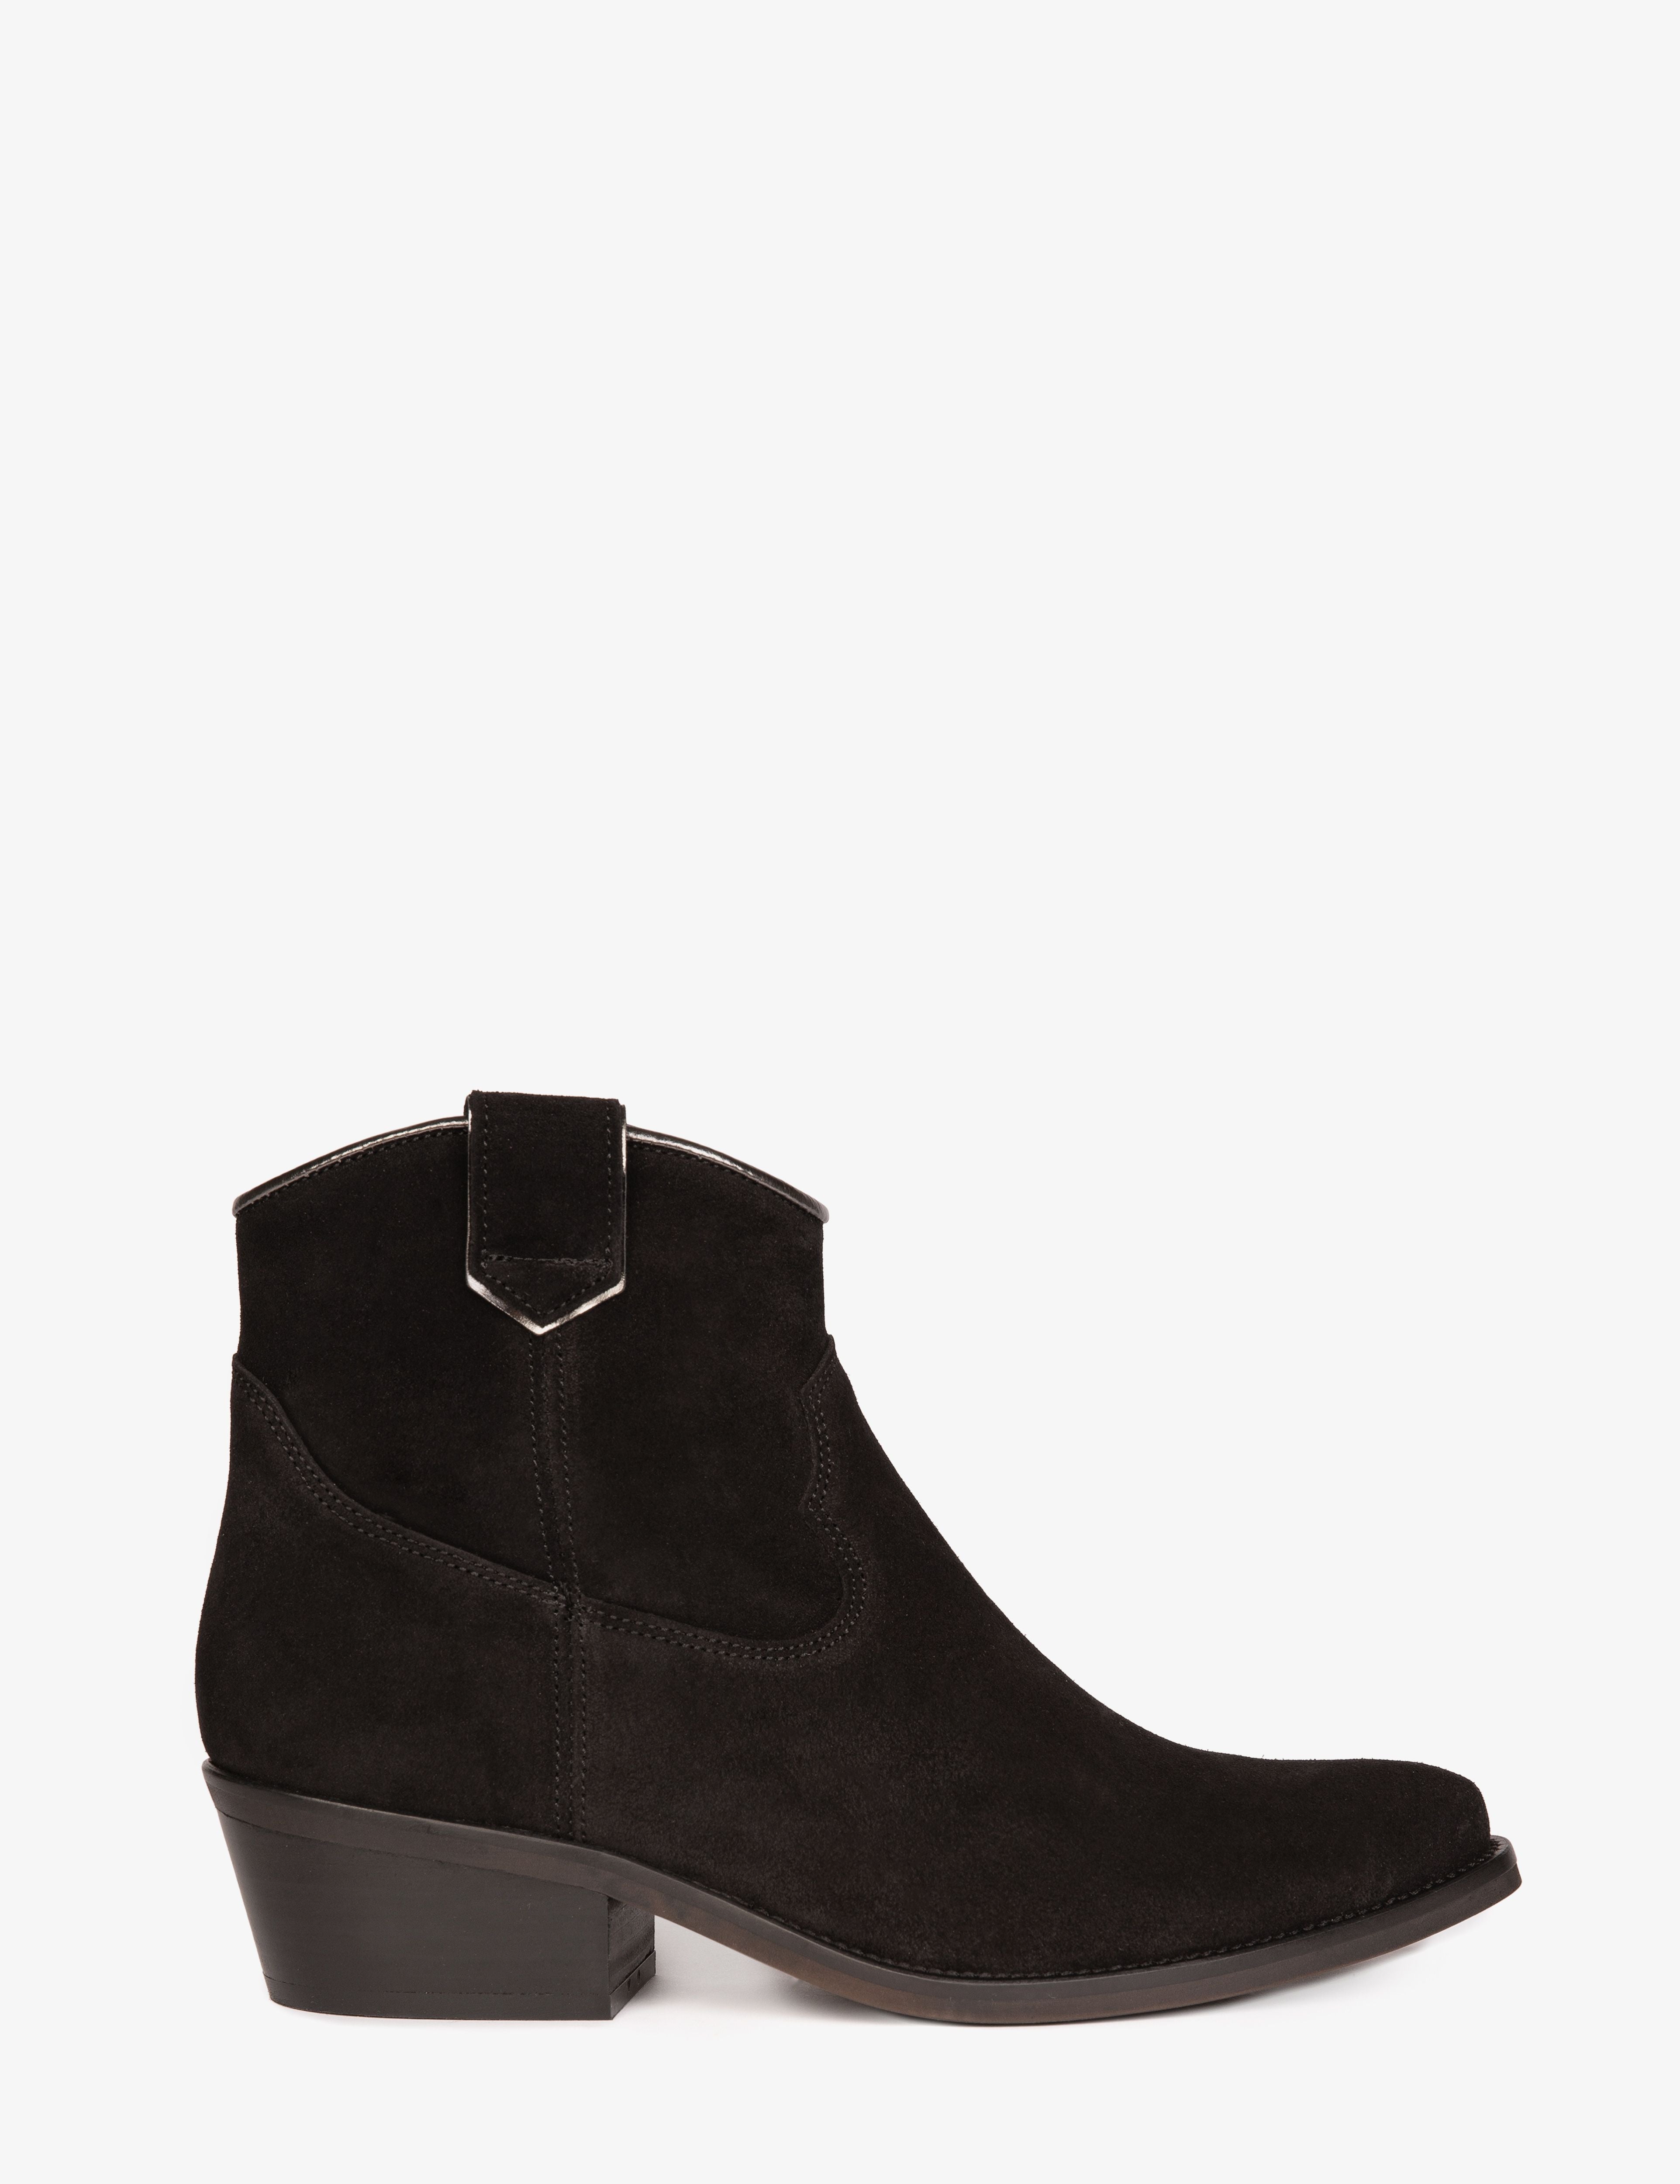 Cassidy Suede Boot - Black